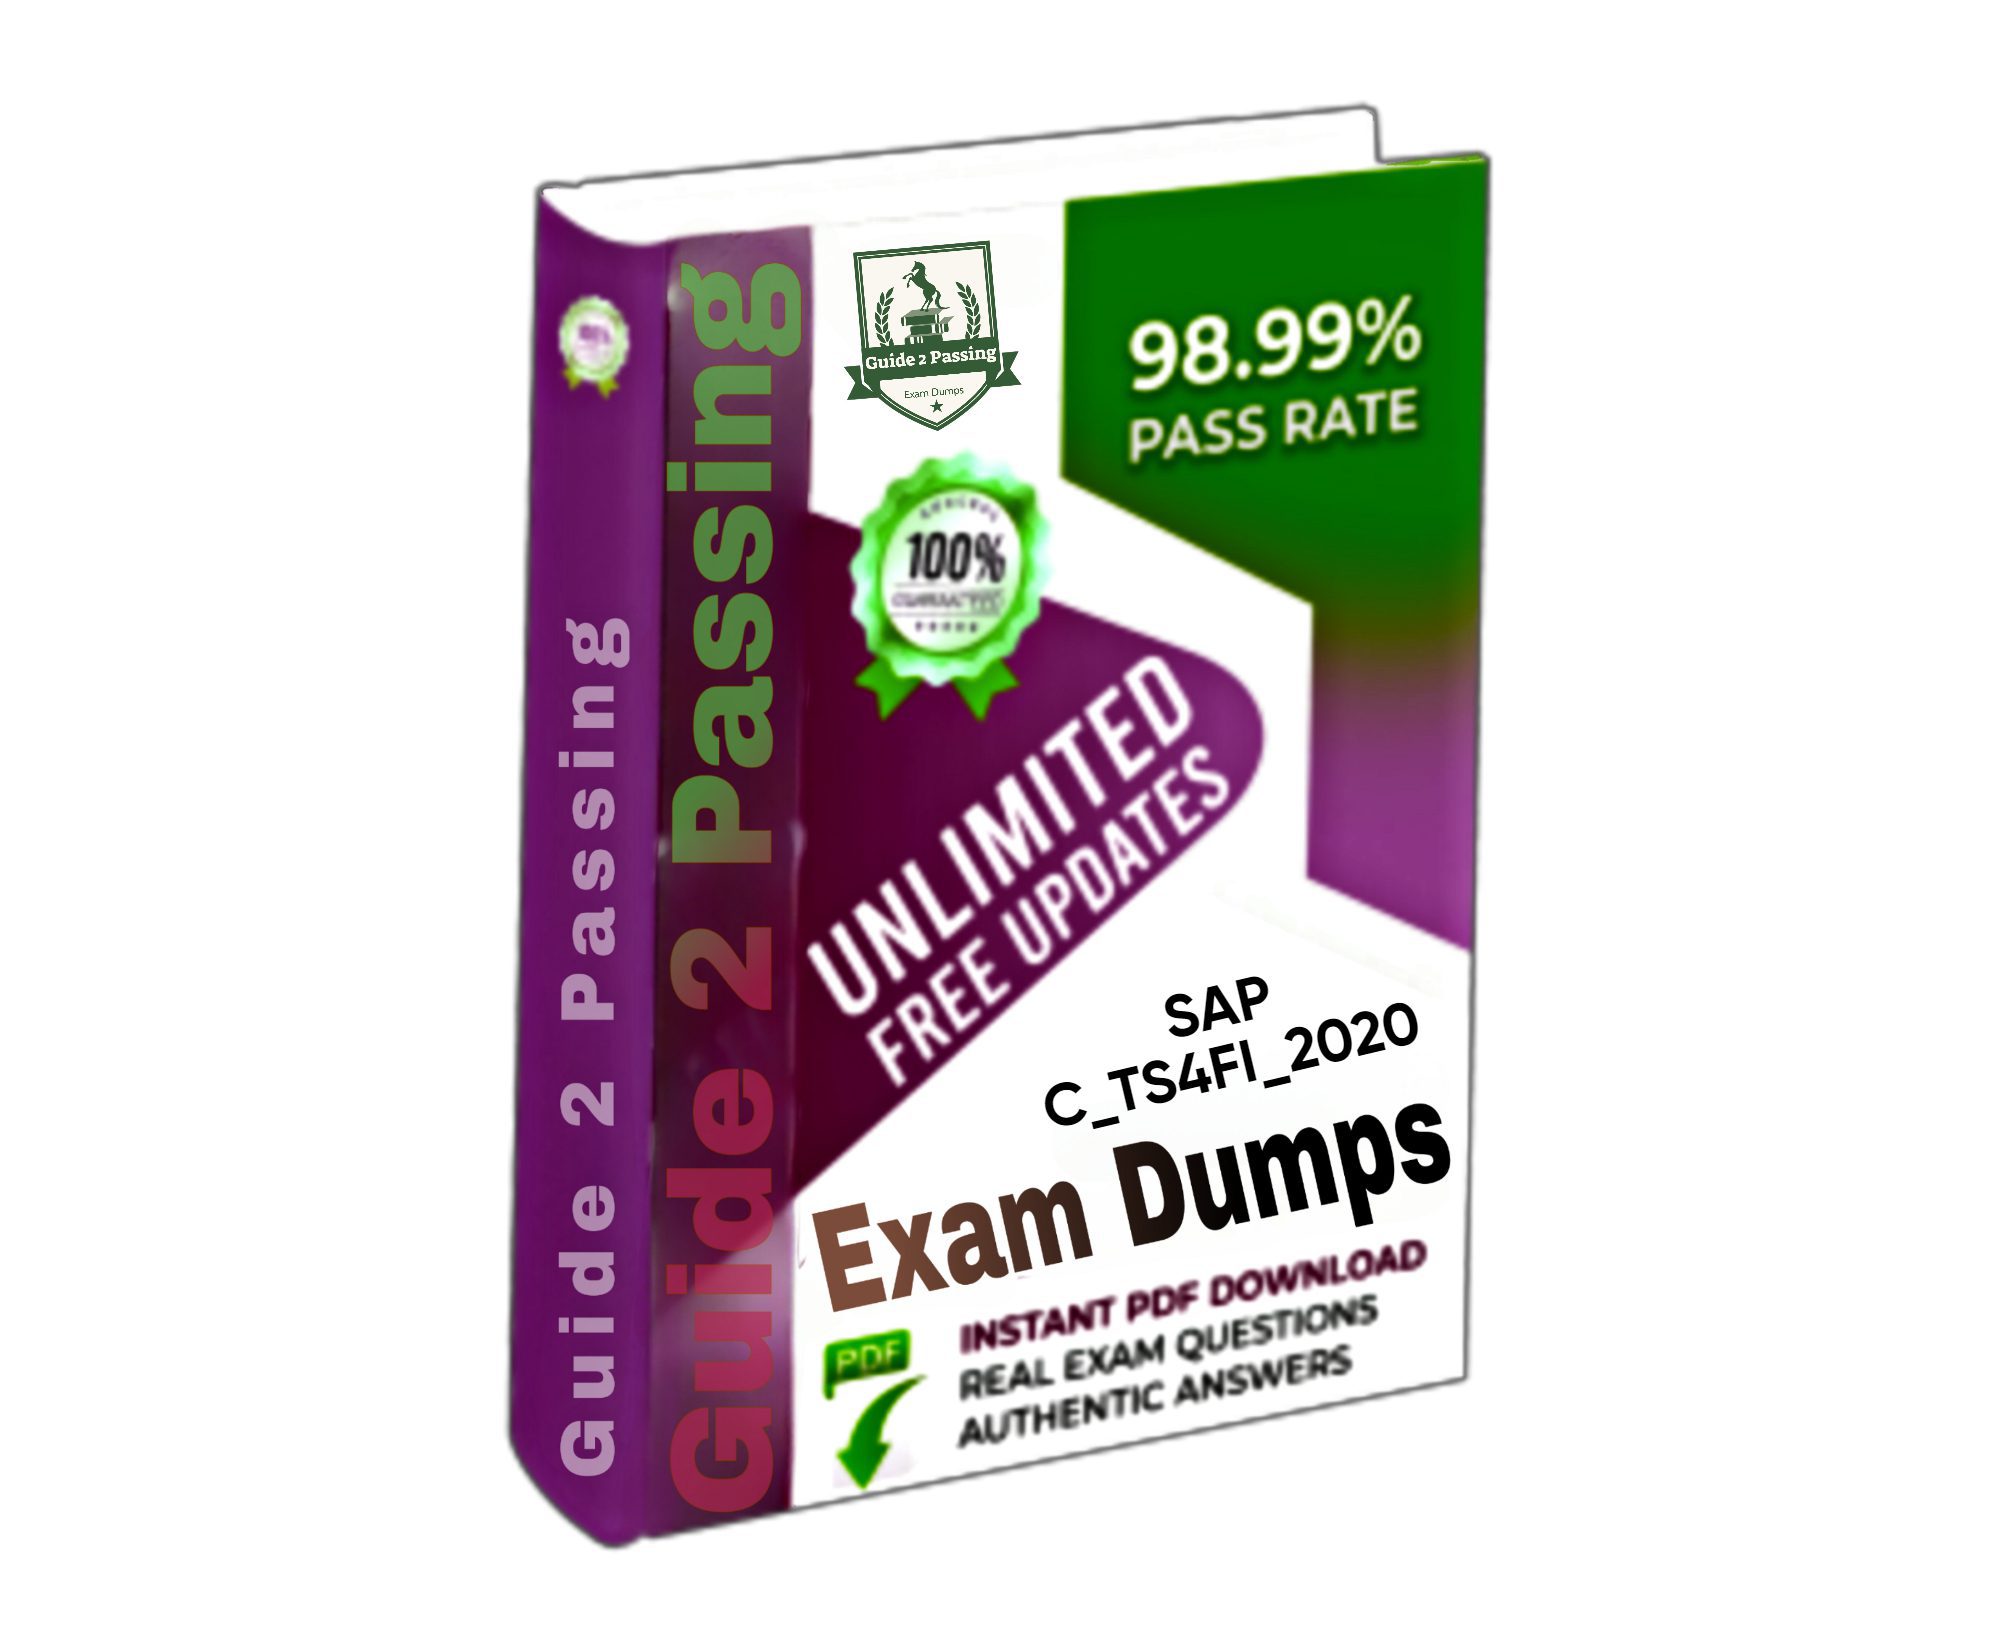 Pass Your SAP C_TS4FI_2020 Exam Dumps From Guide 2 Passing